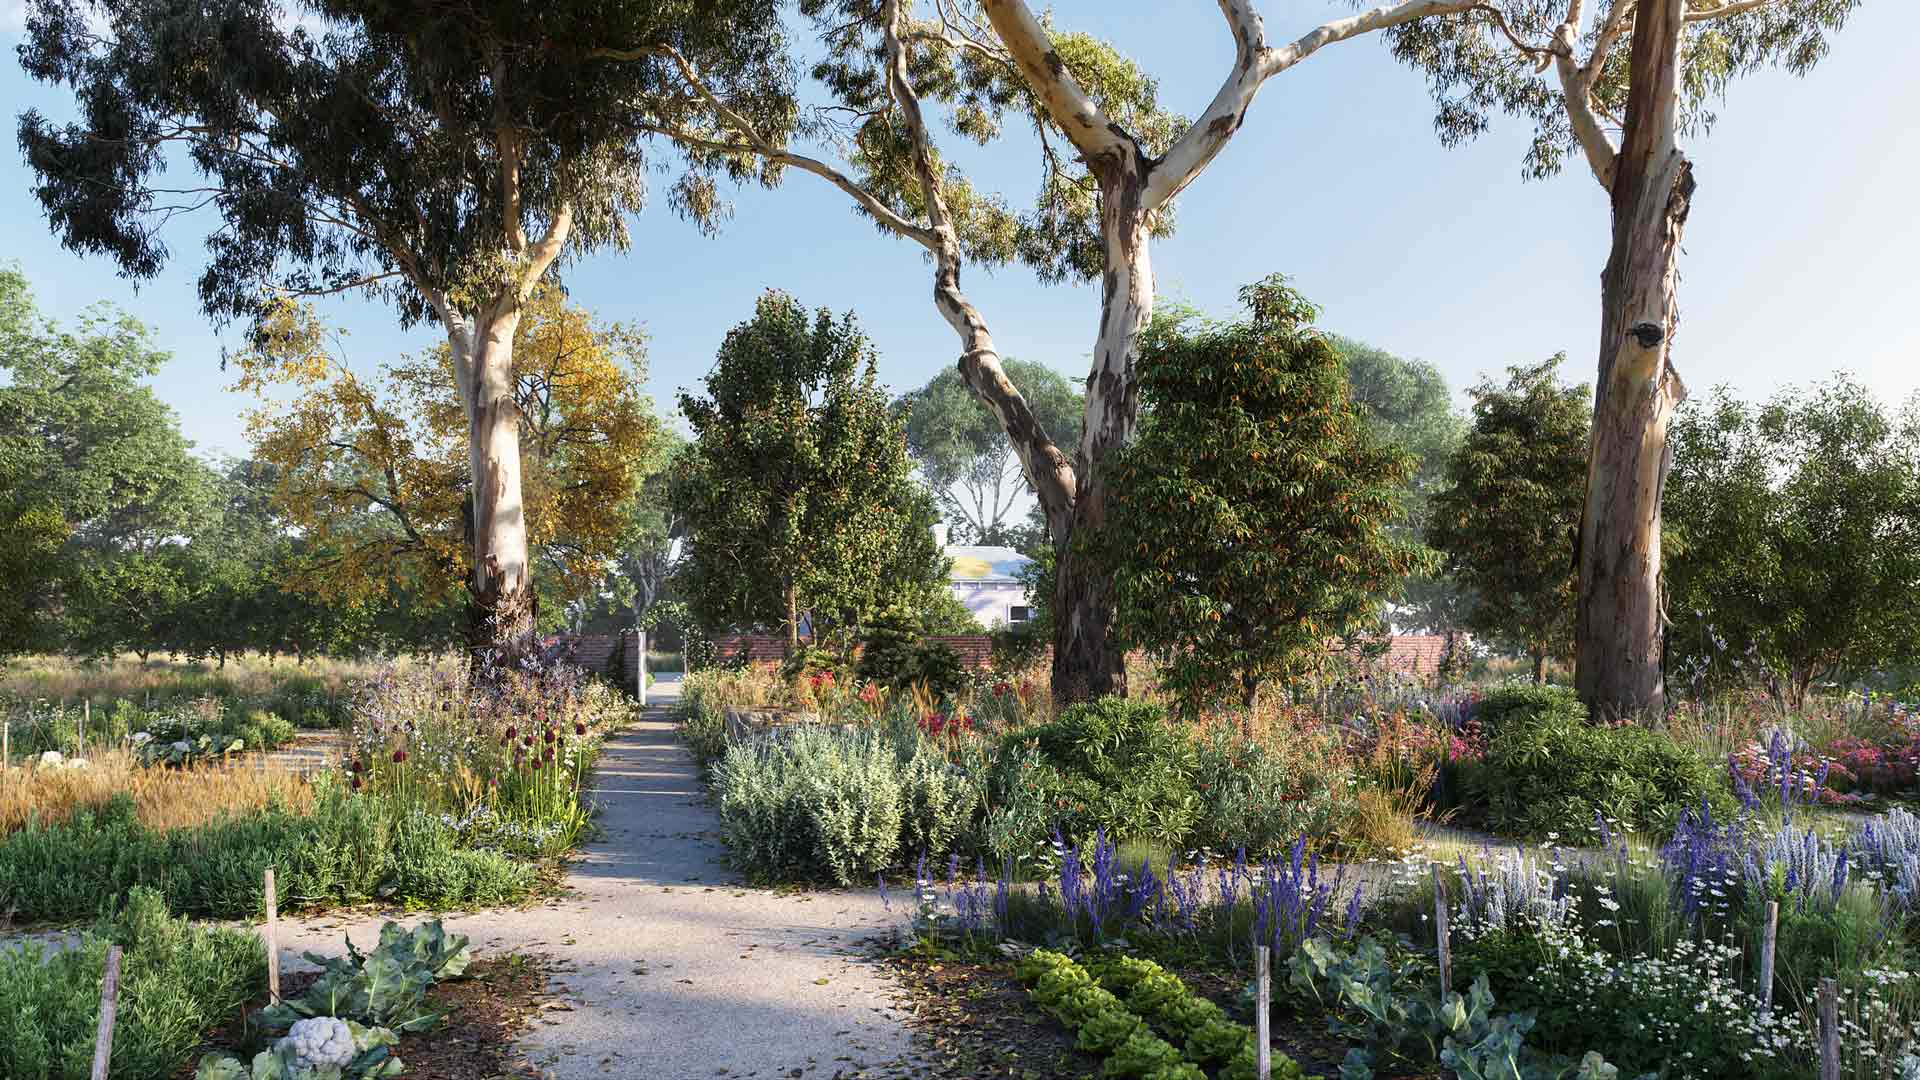 A Healing Garden Is Opening at Melbourne's Heide Museum of Modern Art This Year